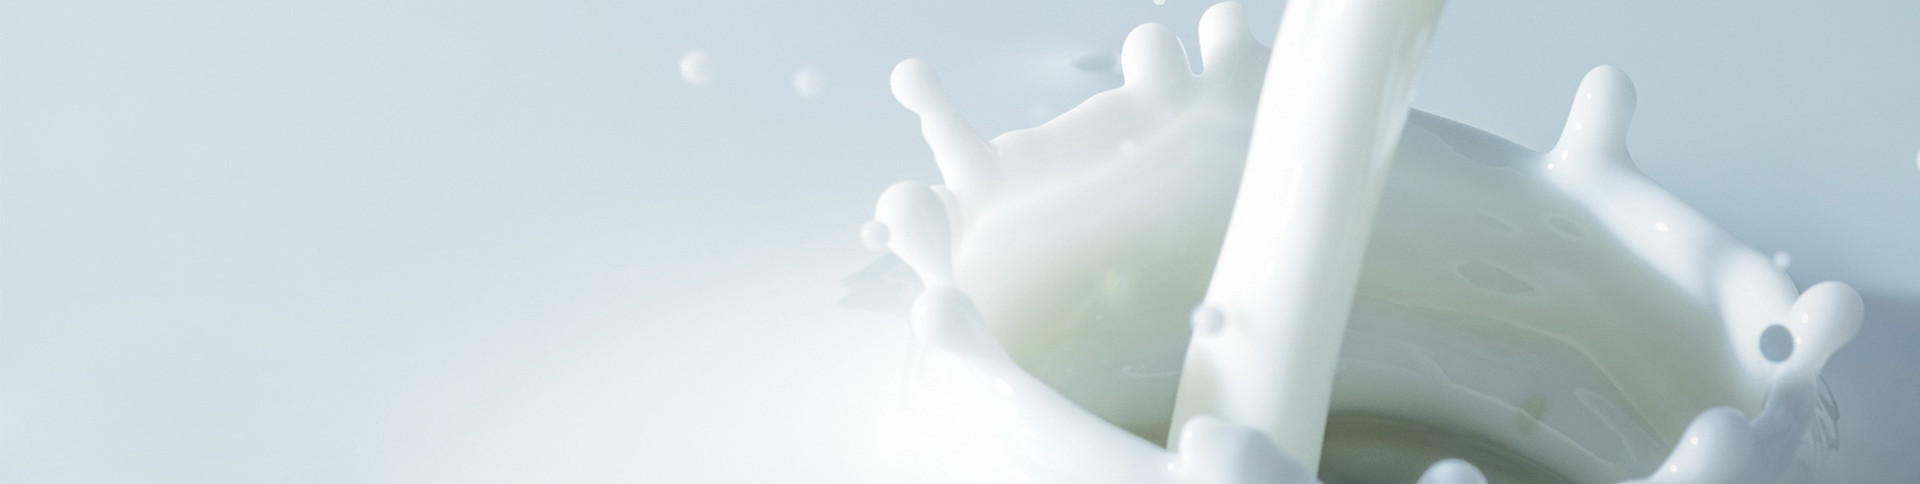 Liquid Dairy Products